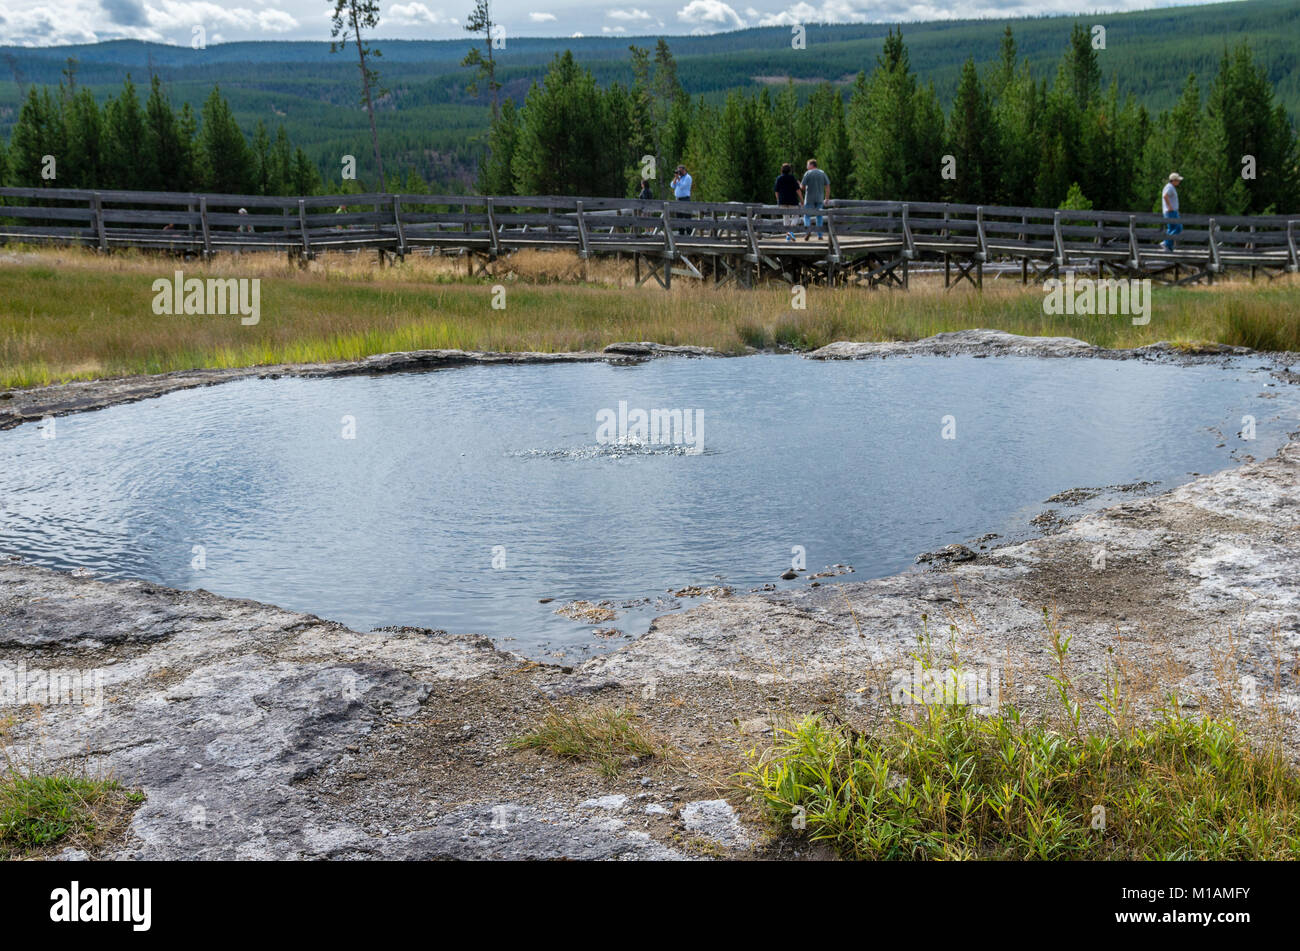 Tourists visiting the Terrace Springs thermal feature.  Yellowstone National Park, Wyoming Stock Photo